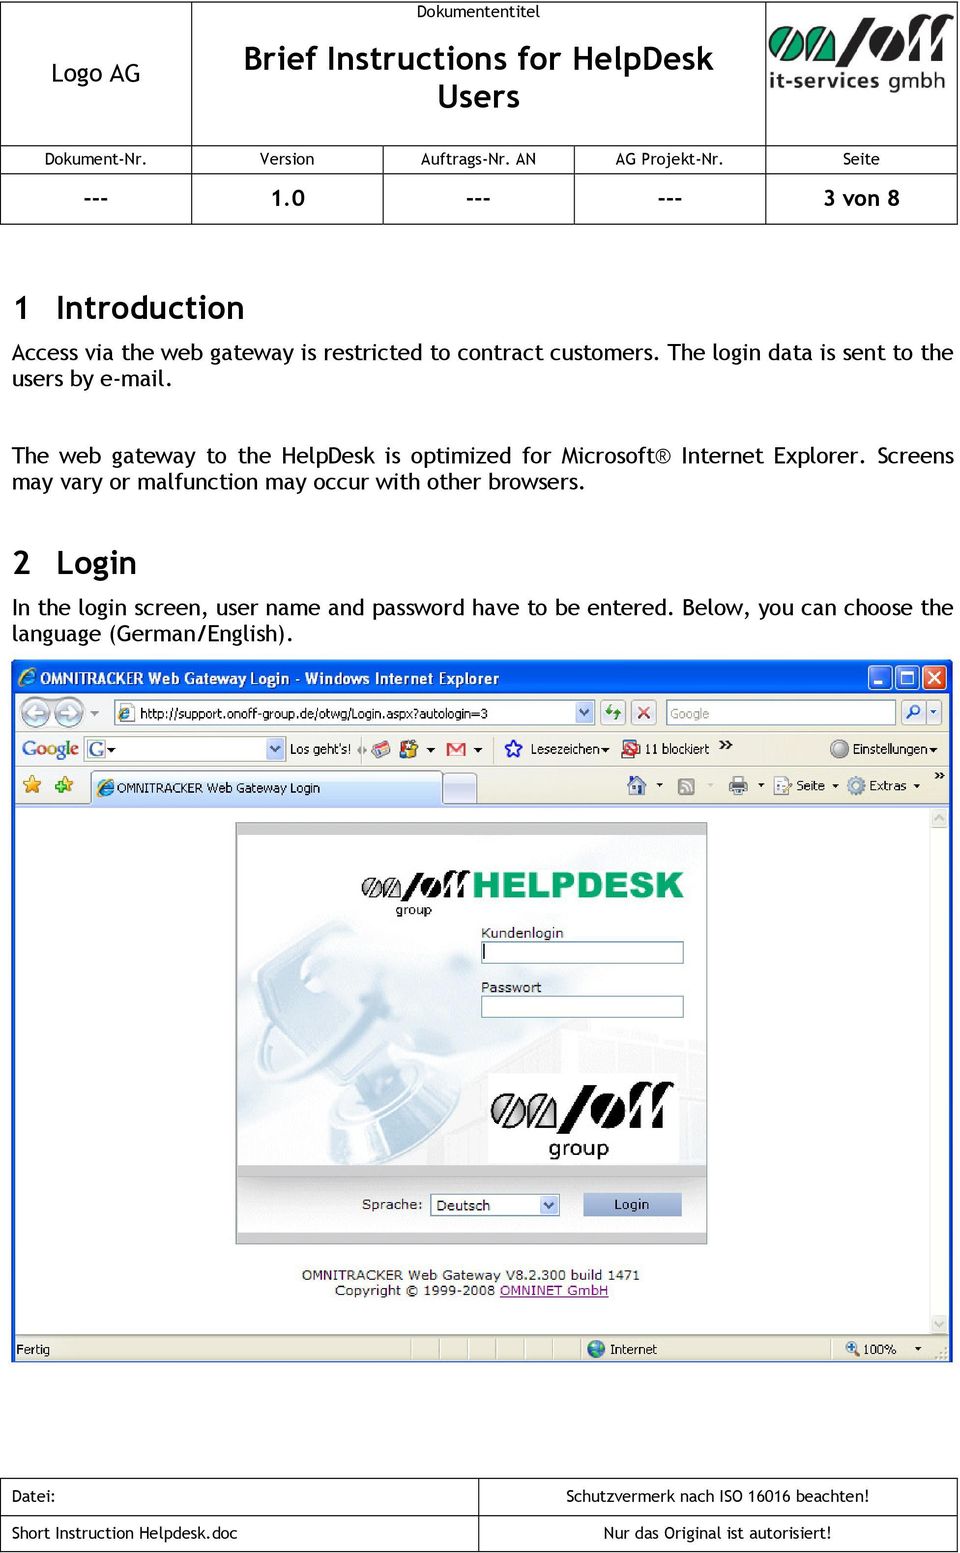 The web gateway to the HelpDesk is optimized for Microsoft Internet Explorer.